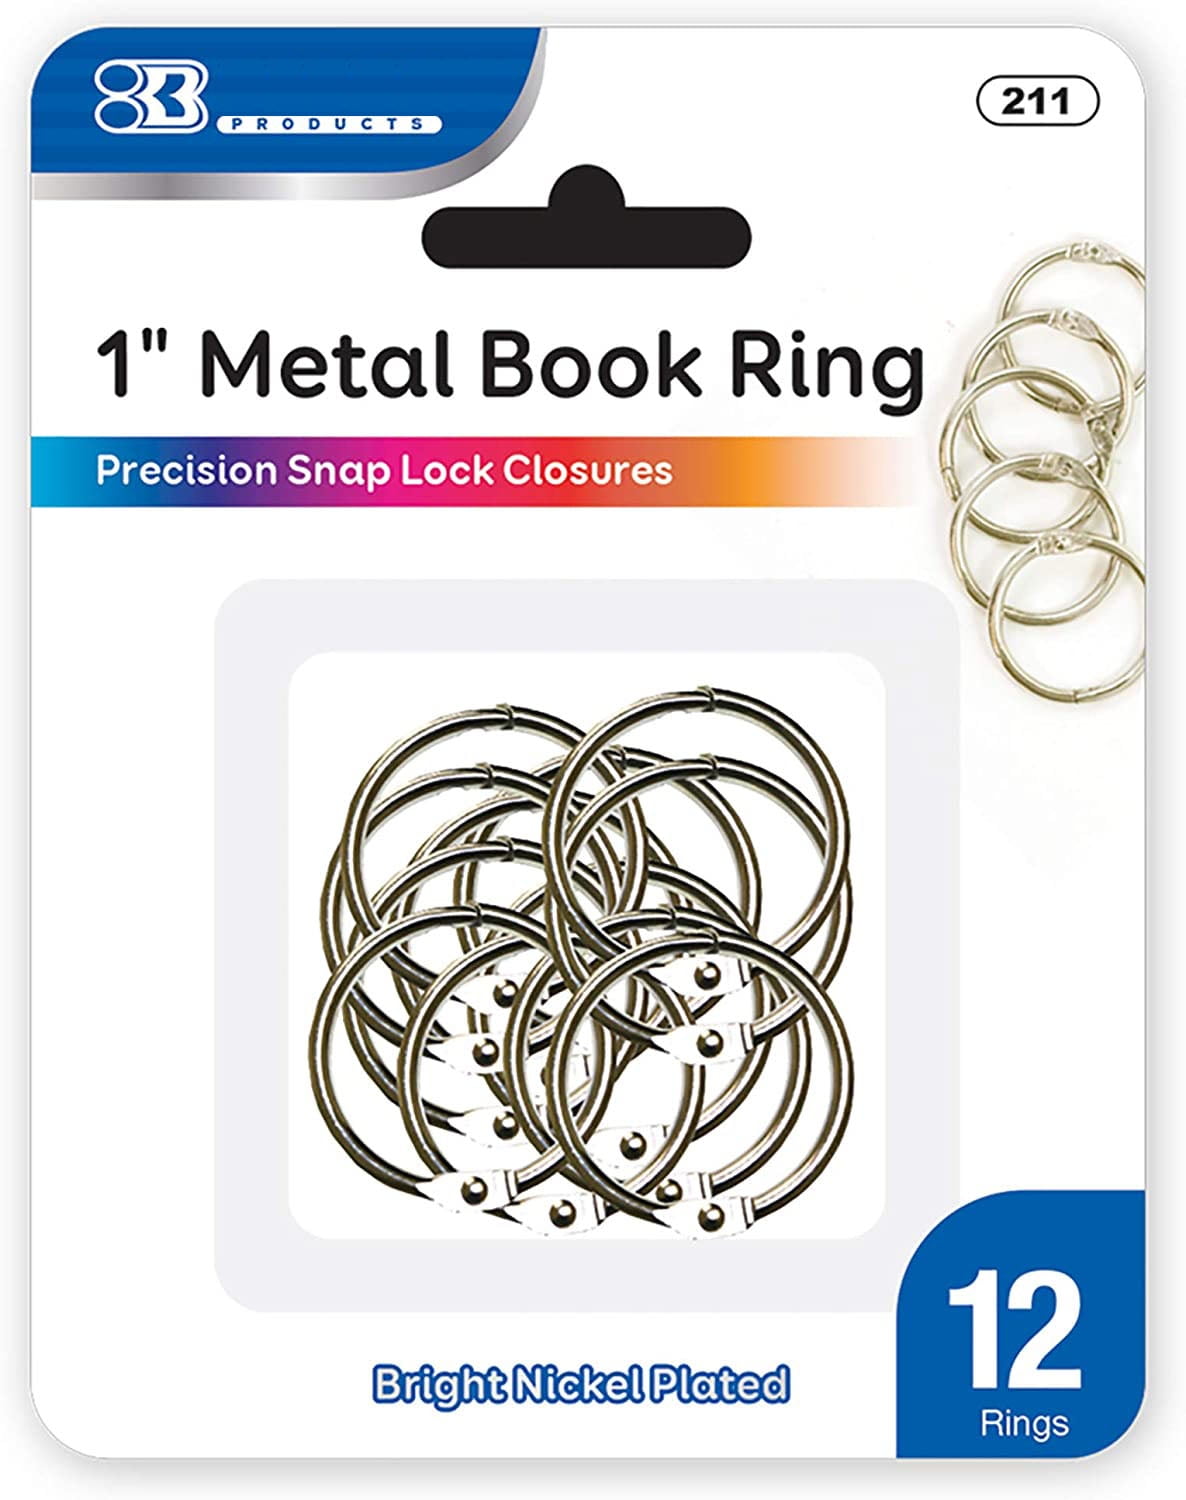 Metal Binder Rings Keychain Key Ring Nickel Plated 1.2 inch 1.5 inch 1.8 inch 2 inch for Scrapbook Notebook Office Supplier School Kootiko 100 Pcs Loose Leaf Book Rings Assorted Sizes 